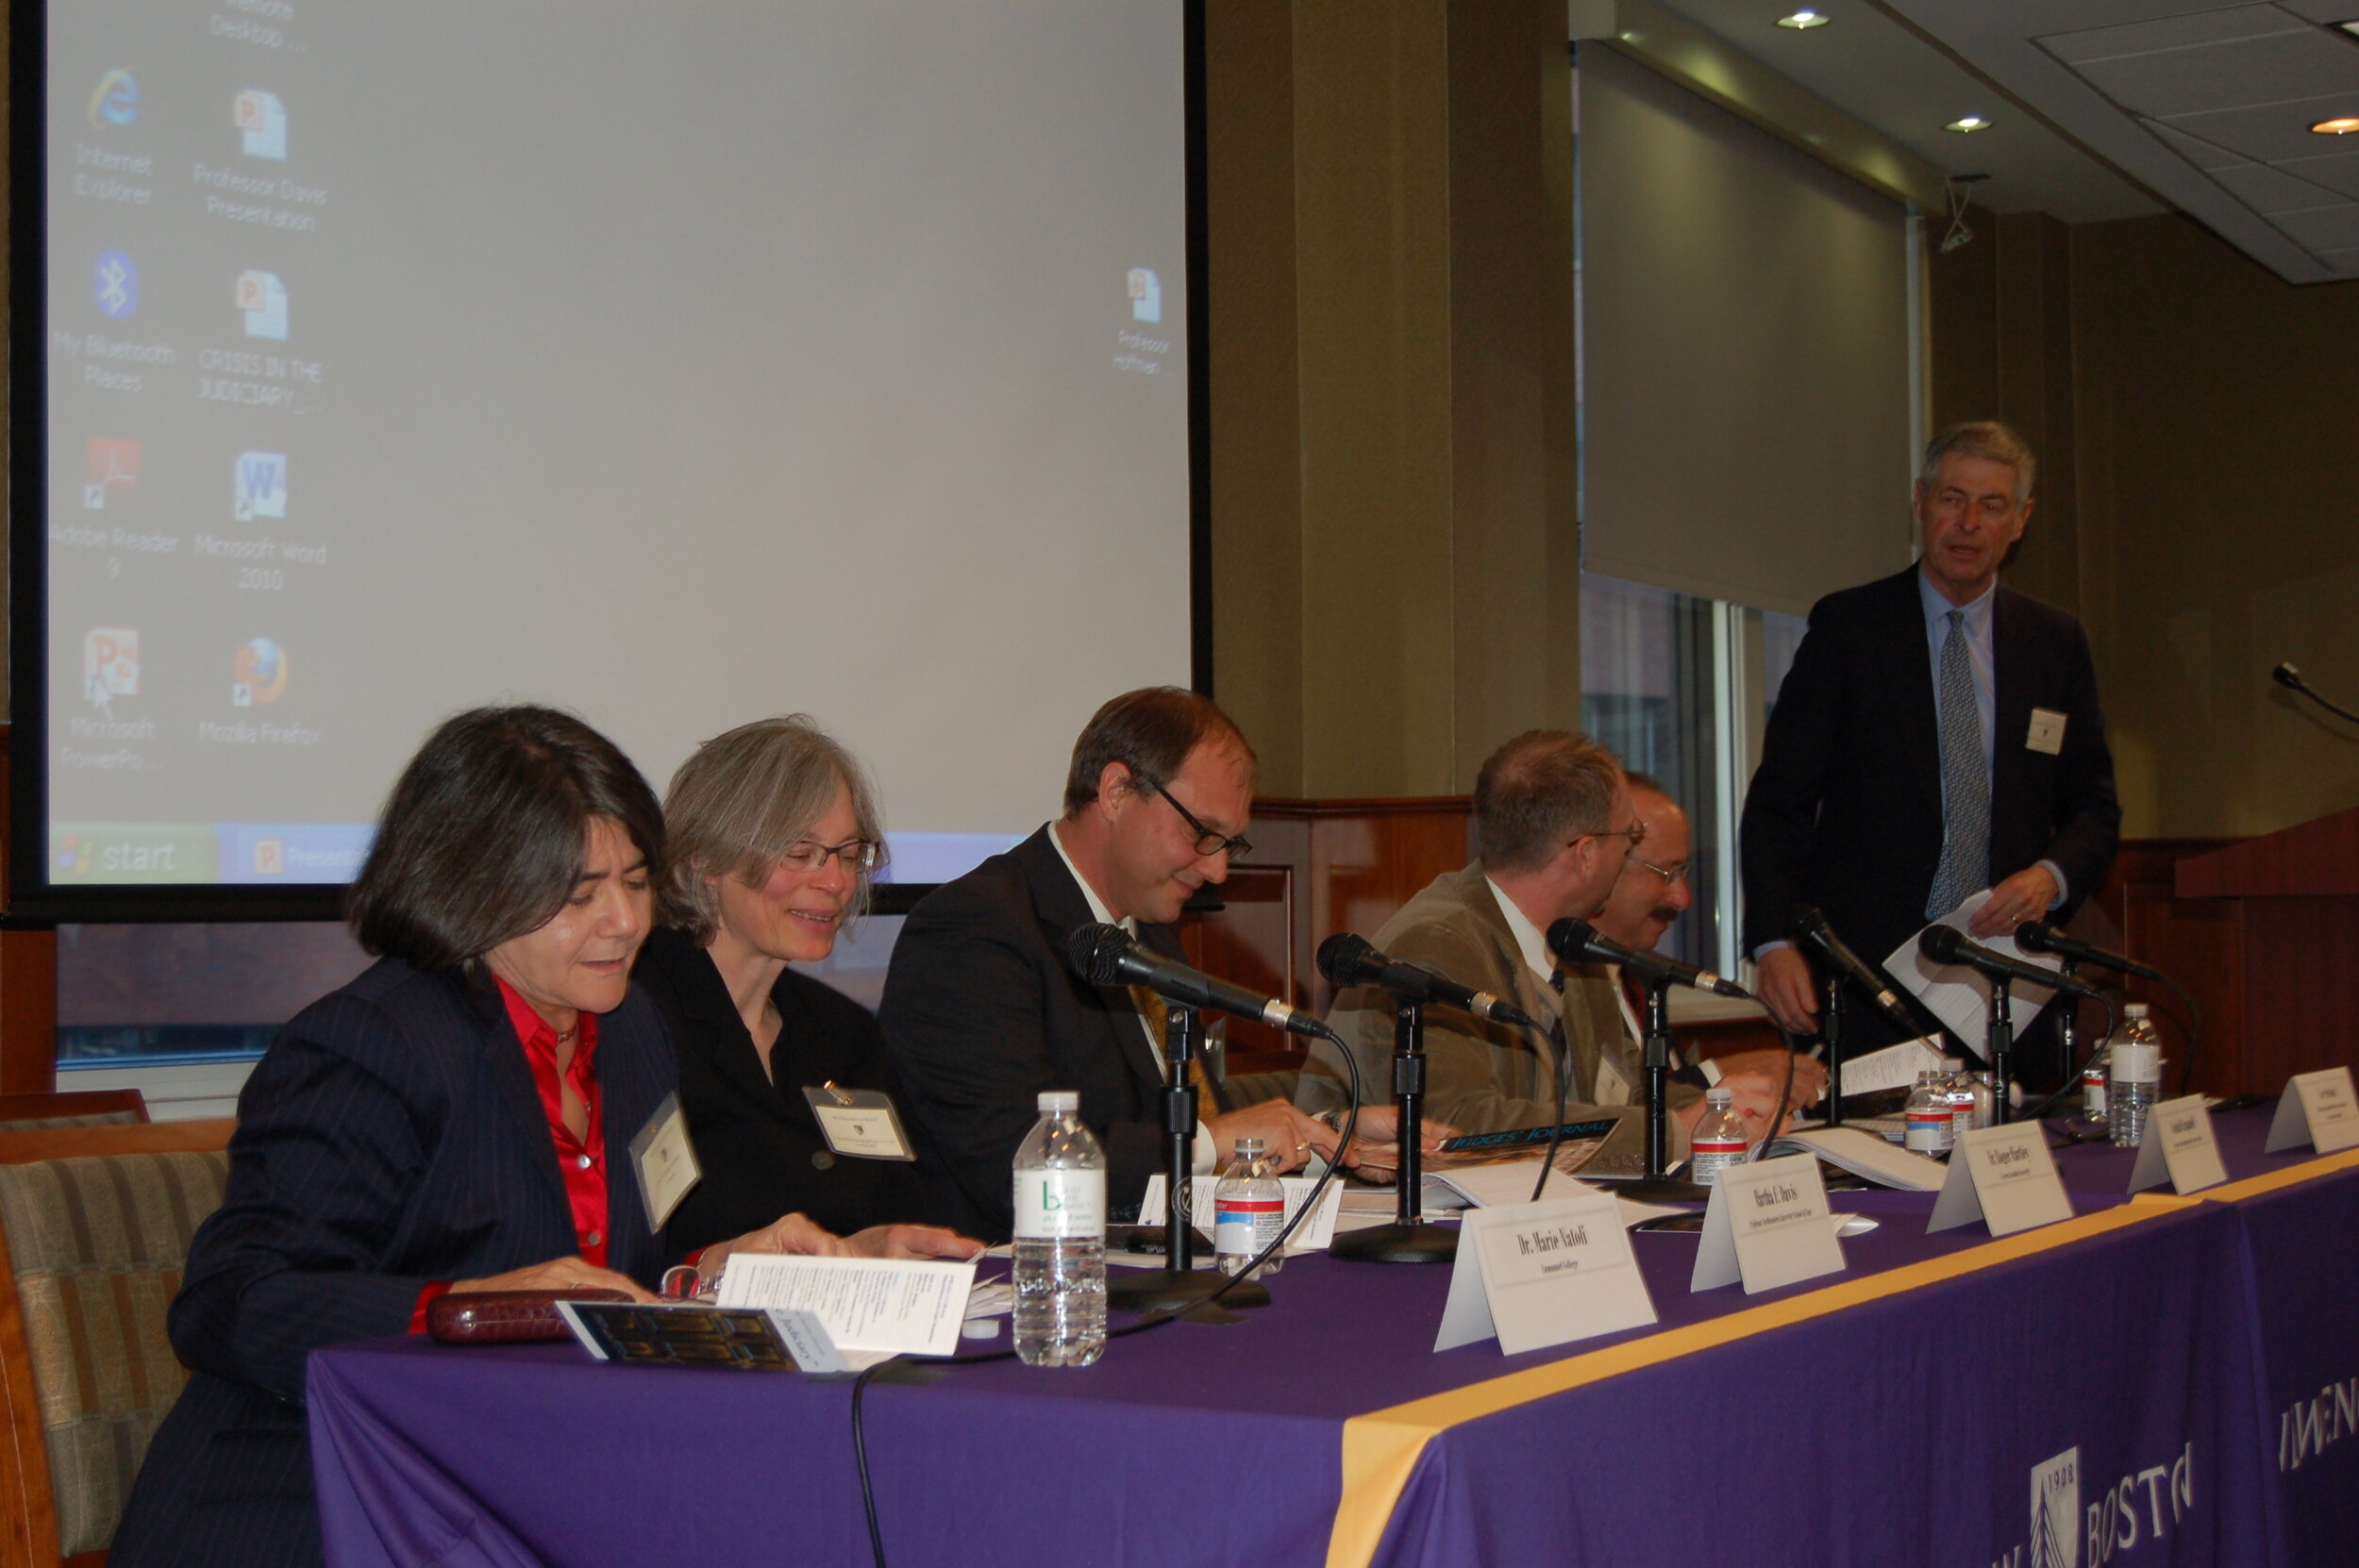  Hon. William Cowin moderates. Seated left to right, Prof. Marie Natoli, Prof. Martha Davis, Dr. Roger Hartley, Prof. Donald Cambpell, and Lee Suskin. 